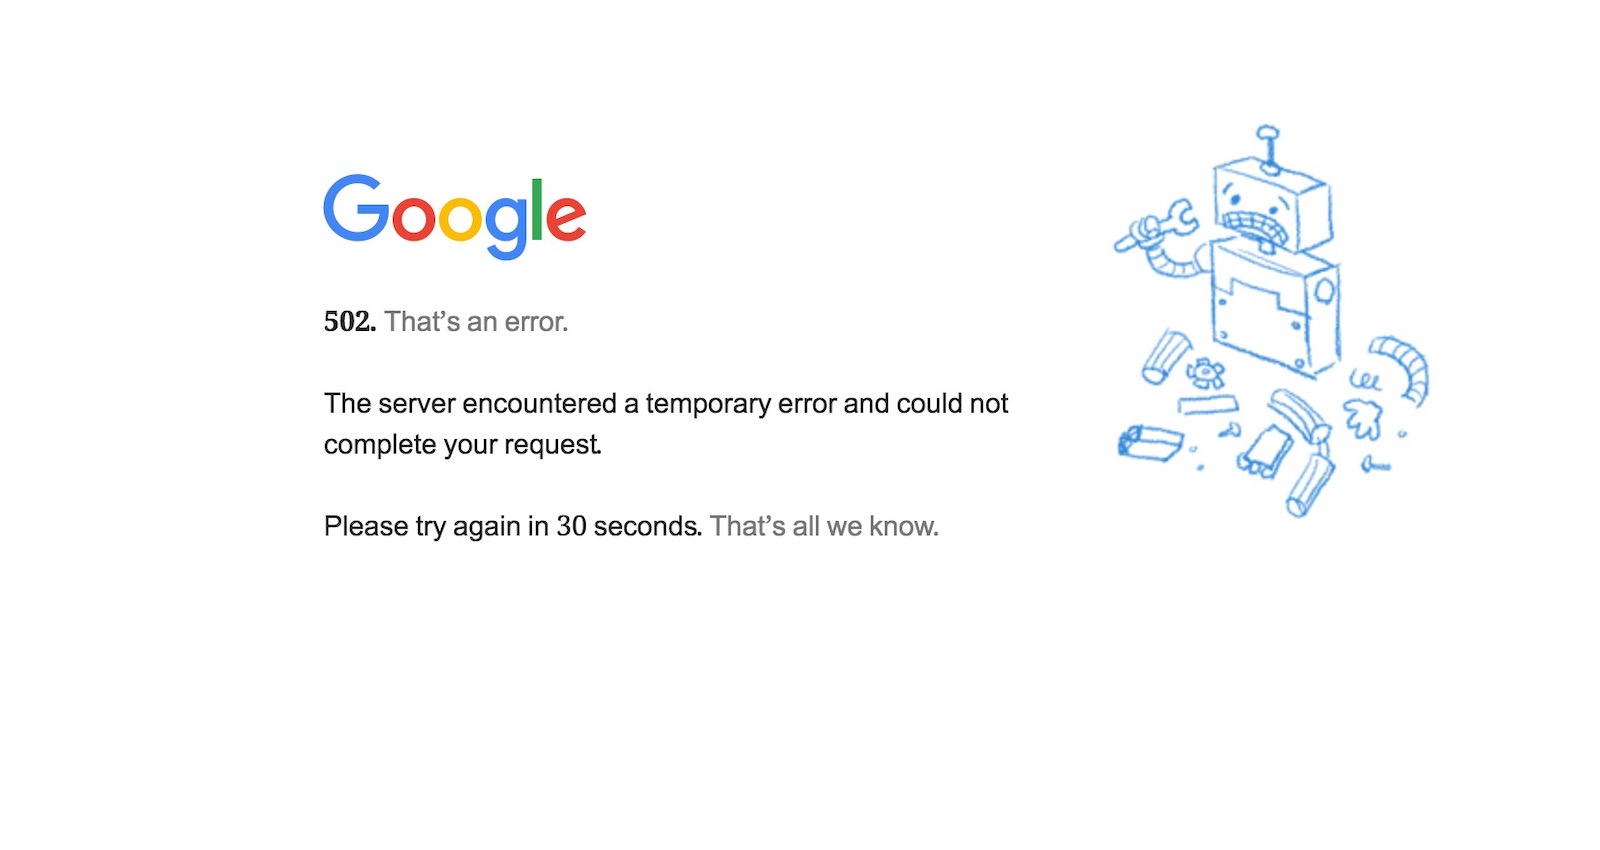 Google services are down